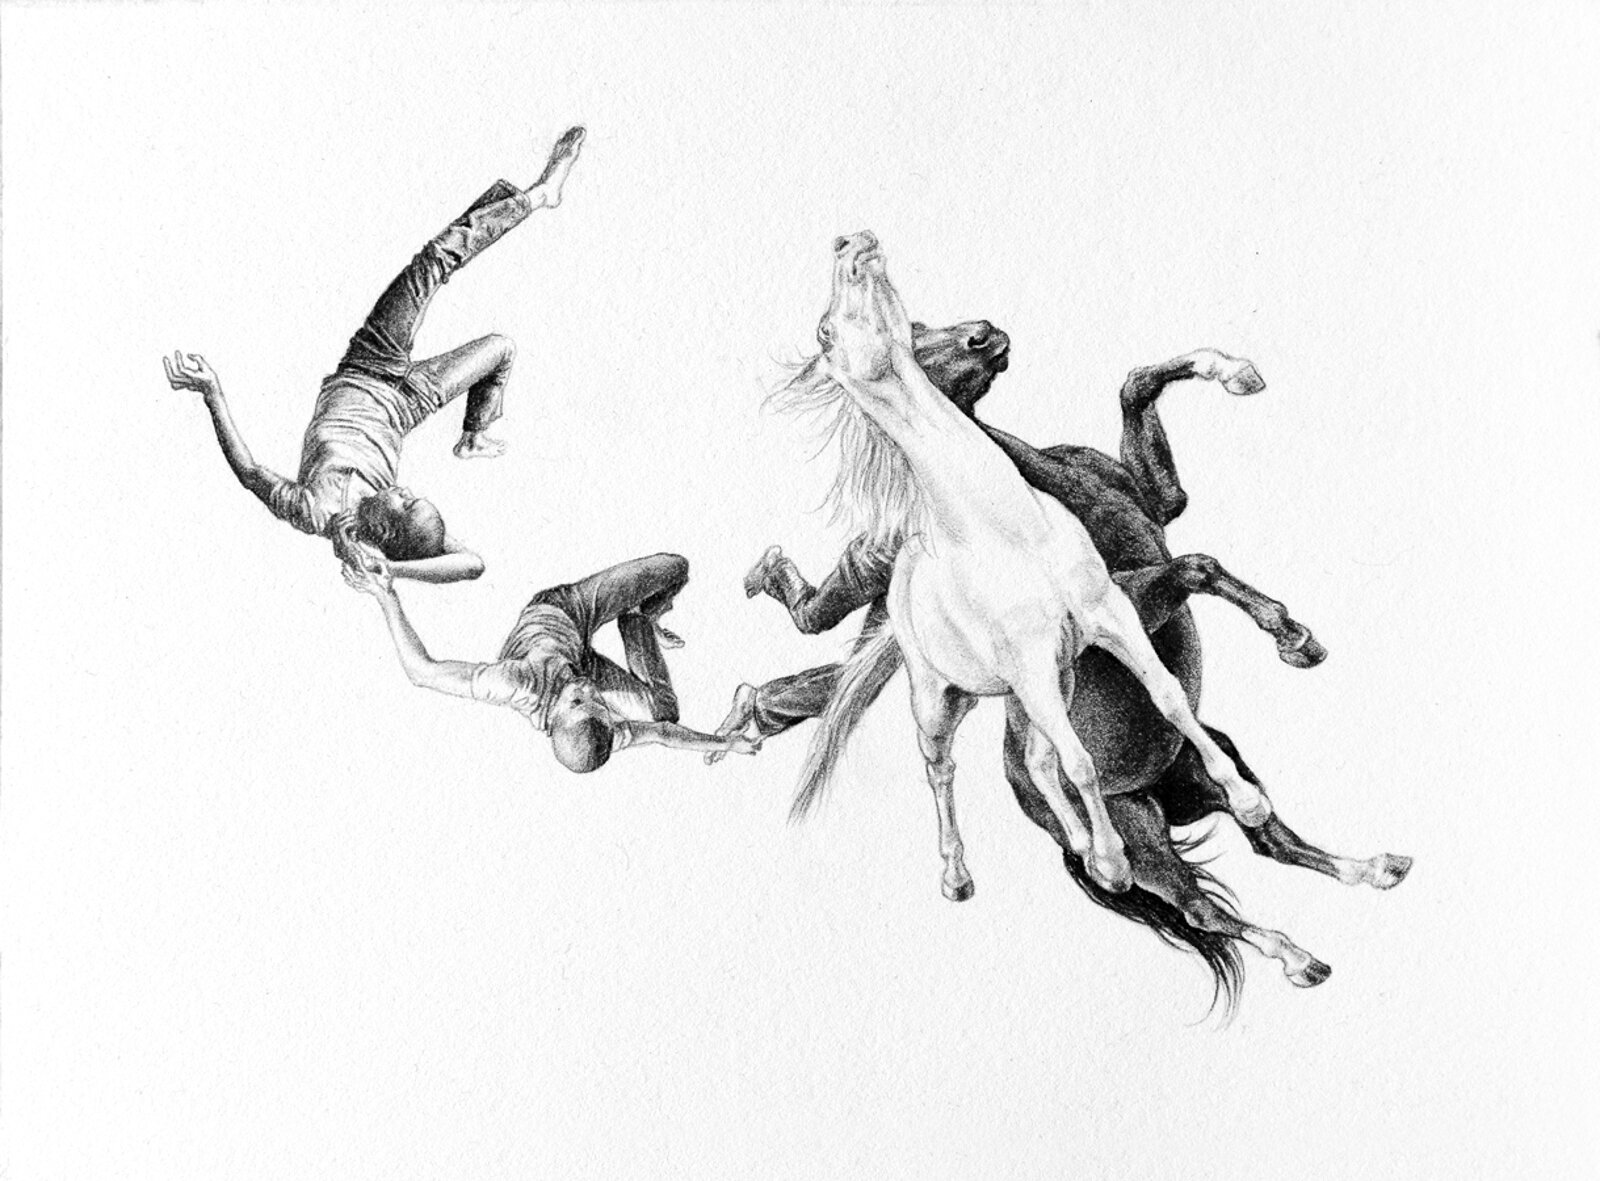 Kelpie | 5 X 7 INCHES | GRAPHITE AND INK ON PAPER | 2012